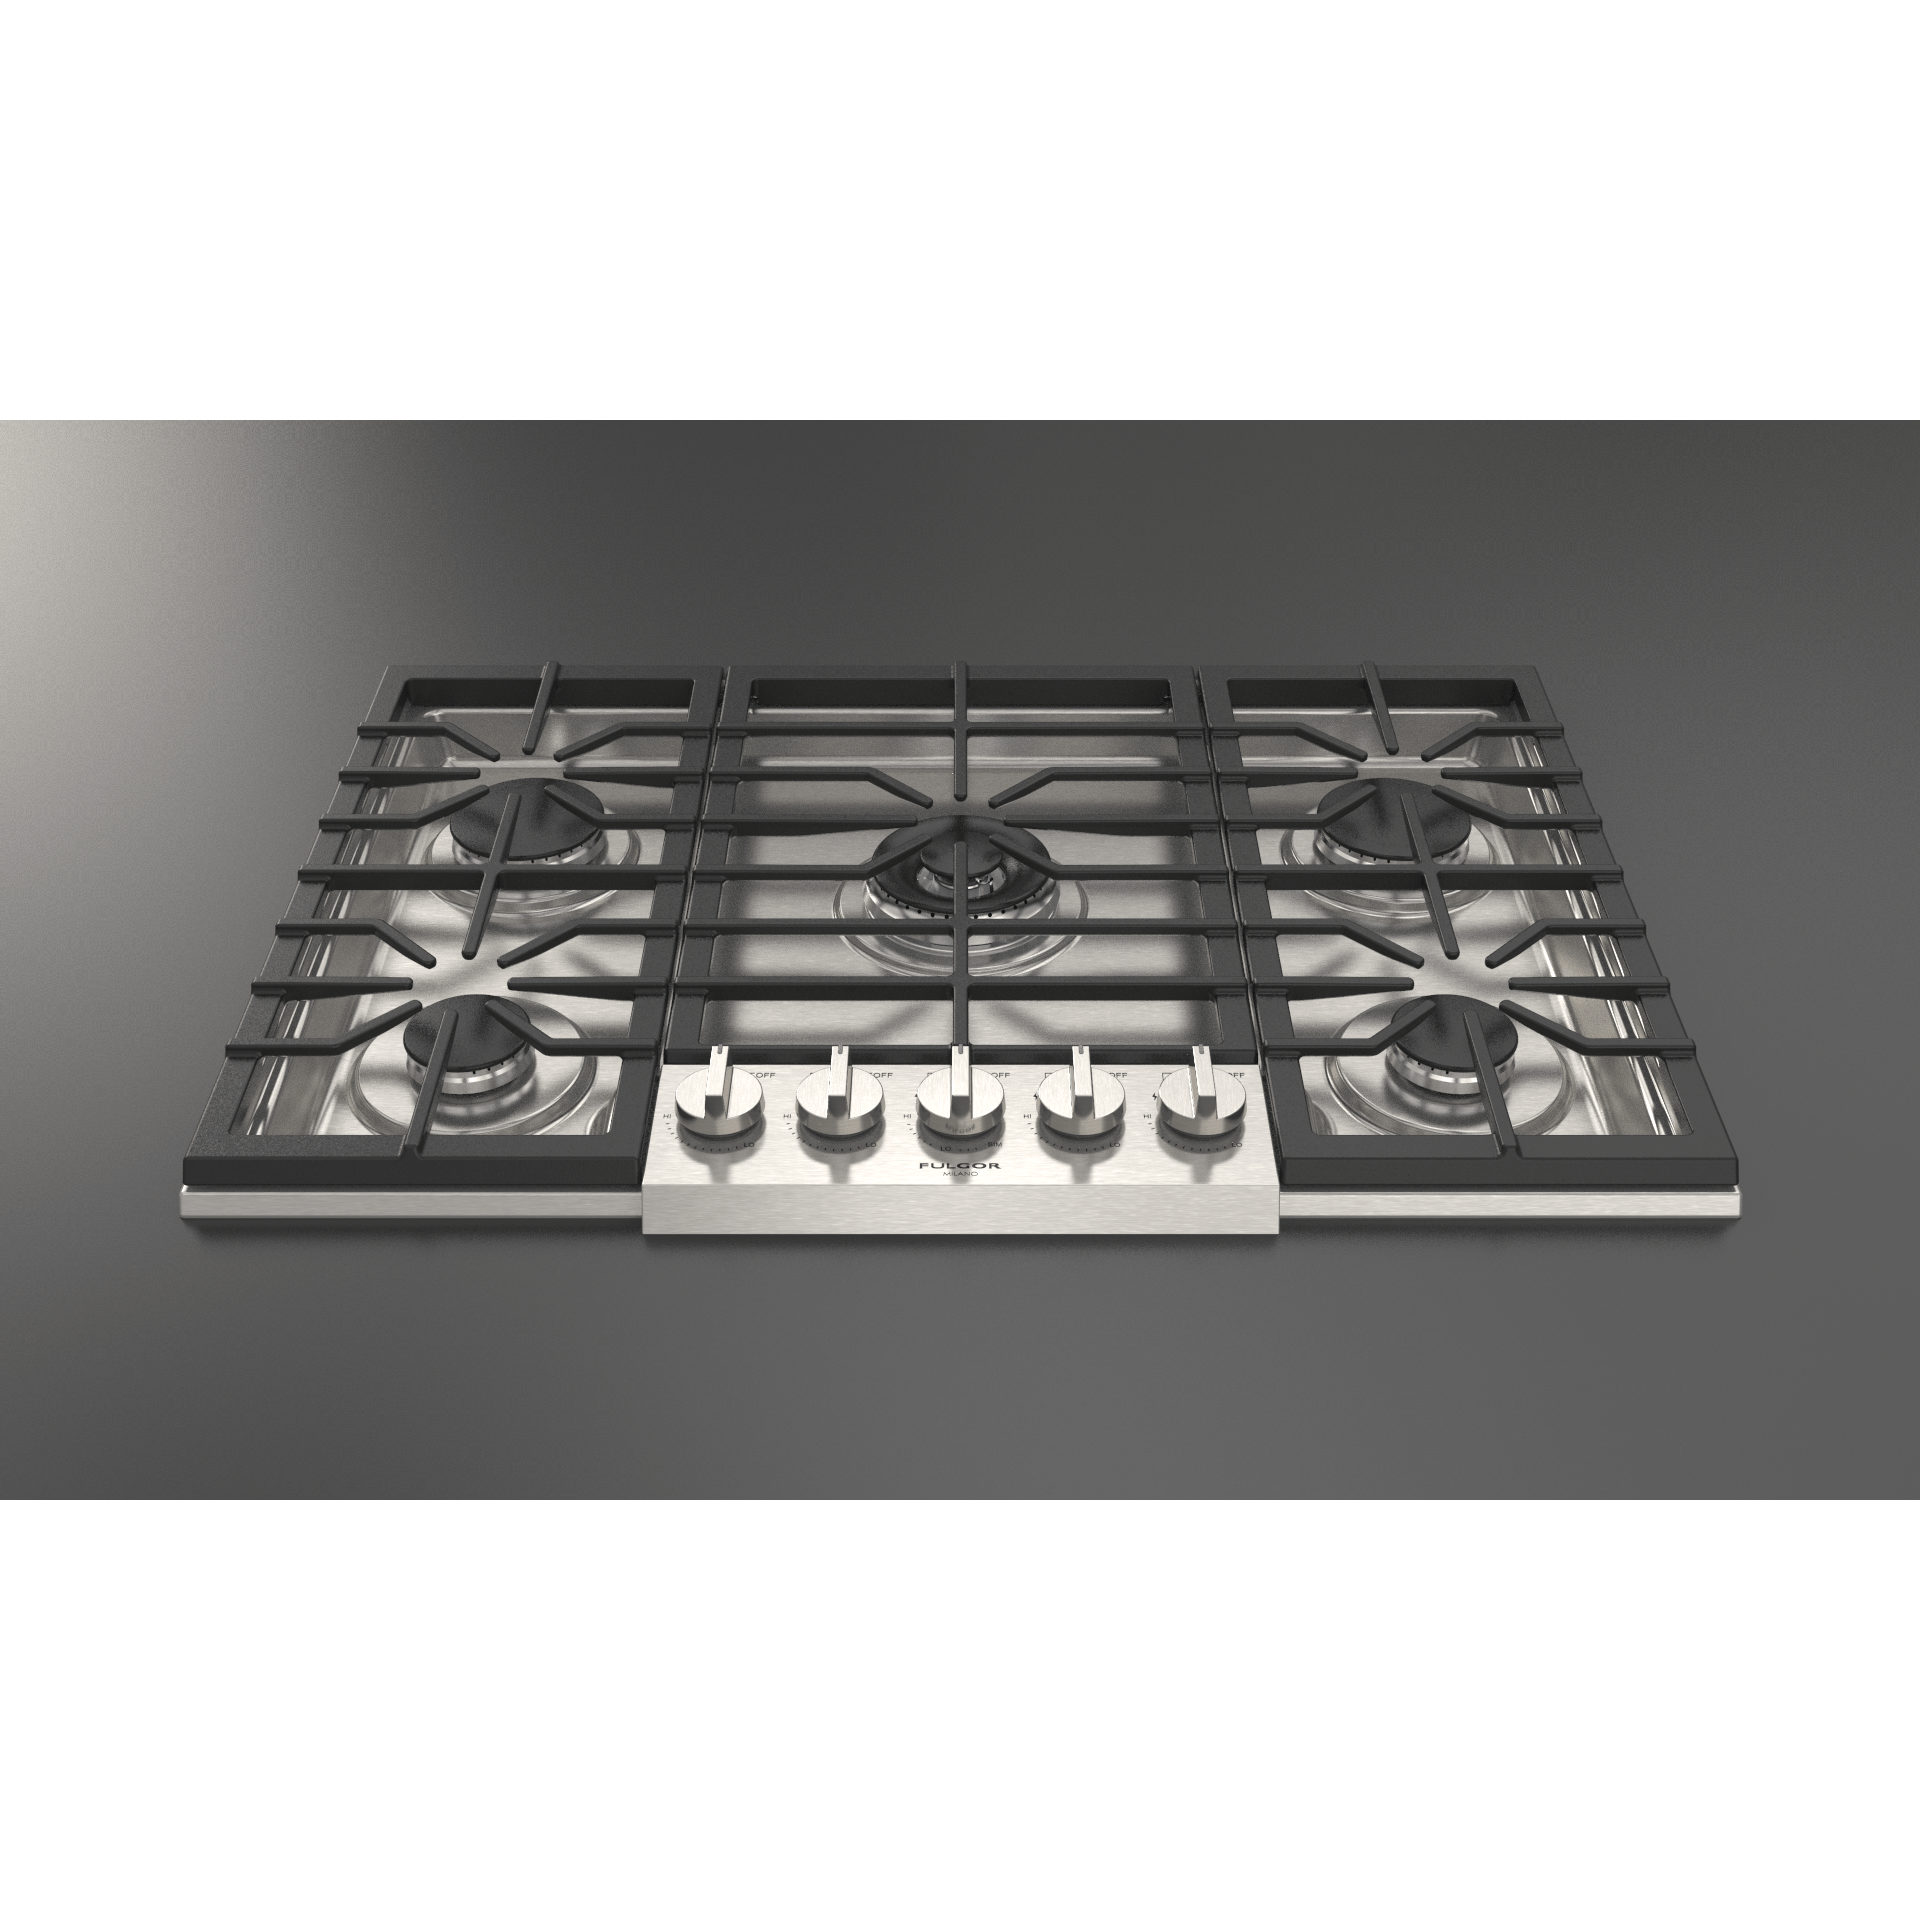 Fulgor Milano 30" Pro-Style Natural Gas Cooktop with 1 Central Dual Burner - F4PGK305S1 Cooktops F4PGK305S1 Luxury Appliances Direct